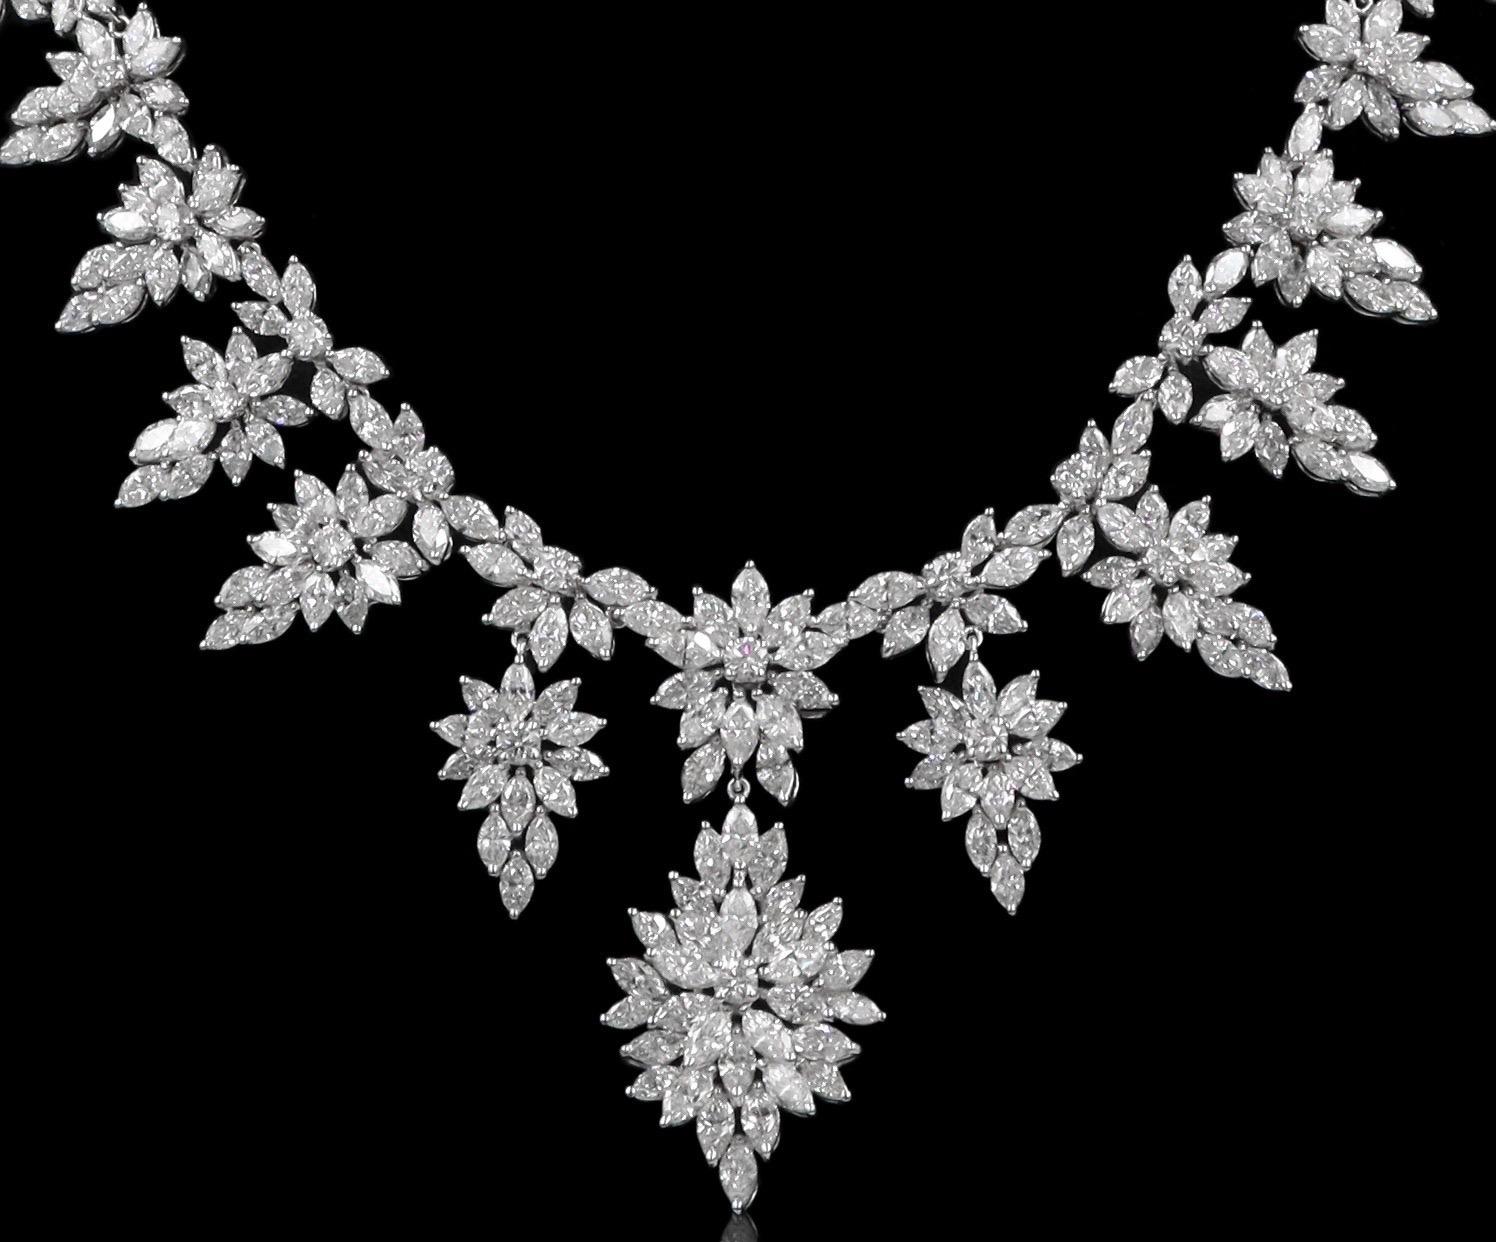 From Emilio Jewelry a dealer located on New York's iconic Fifth Avenue,
Featuring an array of hand picked diamonds, a necklace created by our master Jeweler a guaranteed show stopper. 
Diamond Weight: 30.48 carats
Please inquire for additional